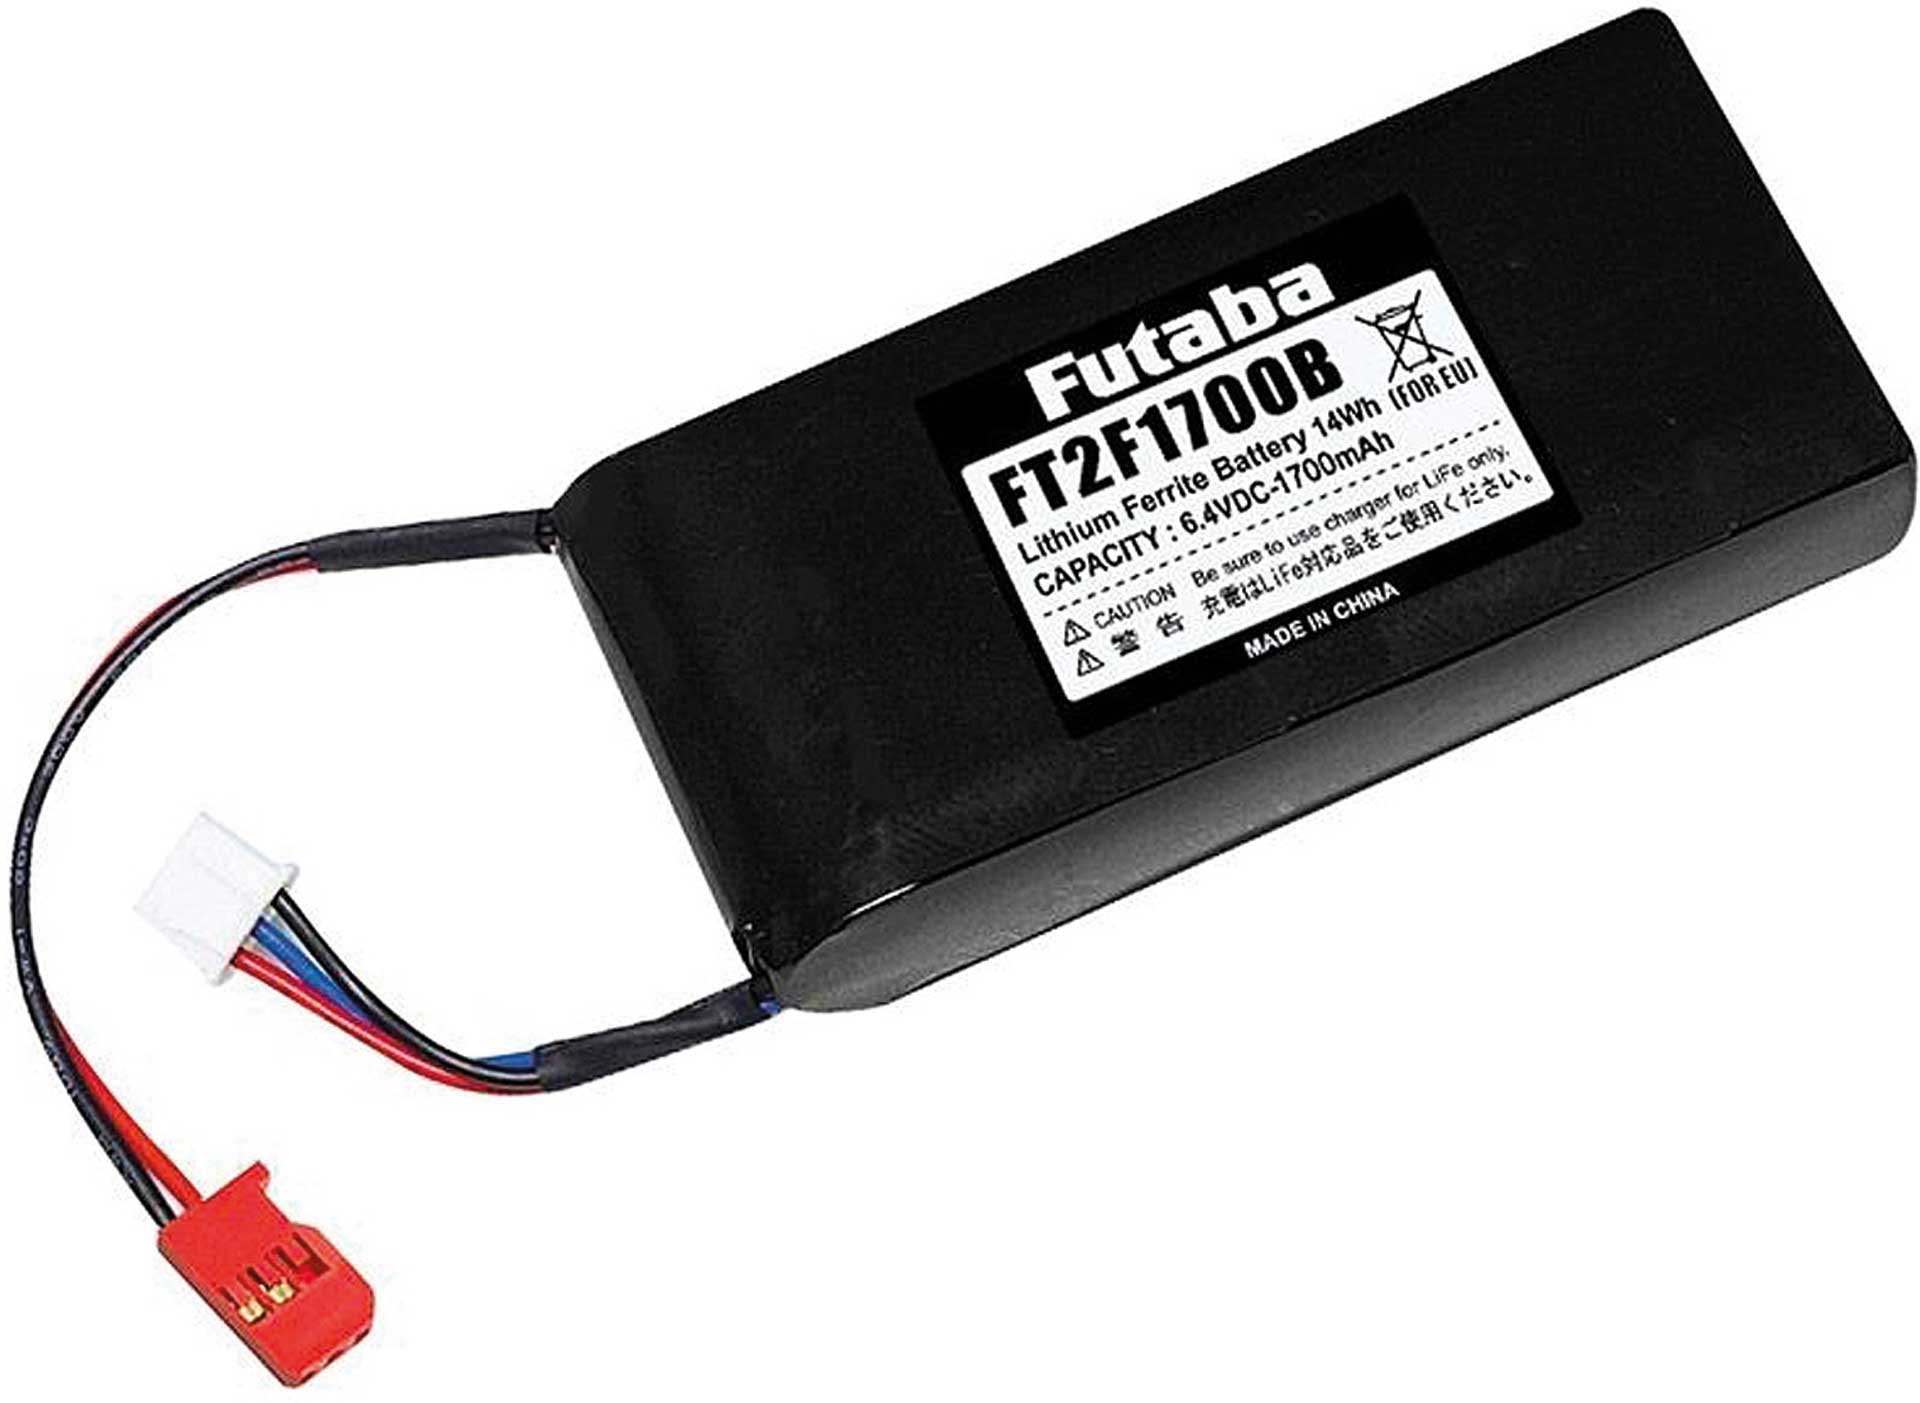 FUTABA Transmitter battery 6,6V LiFe 1700mAh for many current systems from T4PX to T14SG